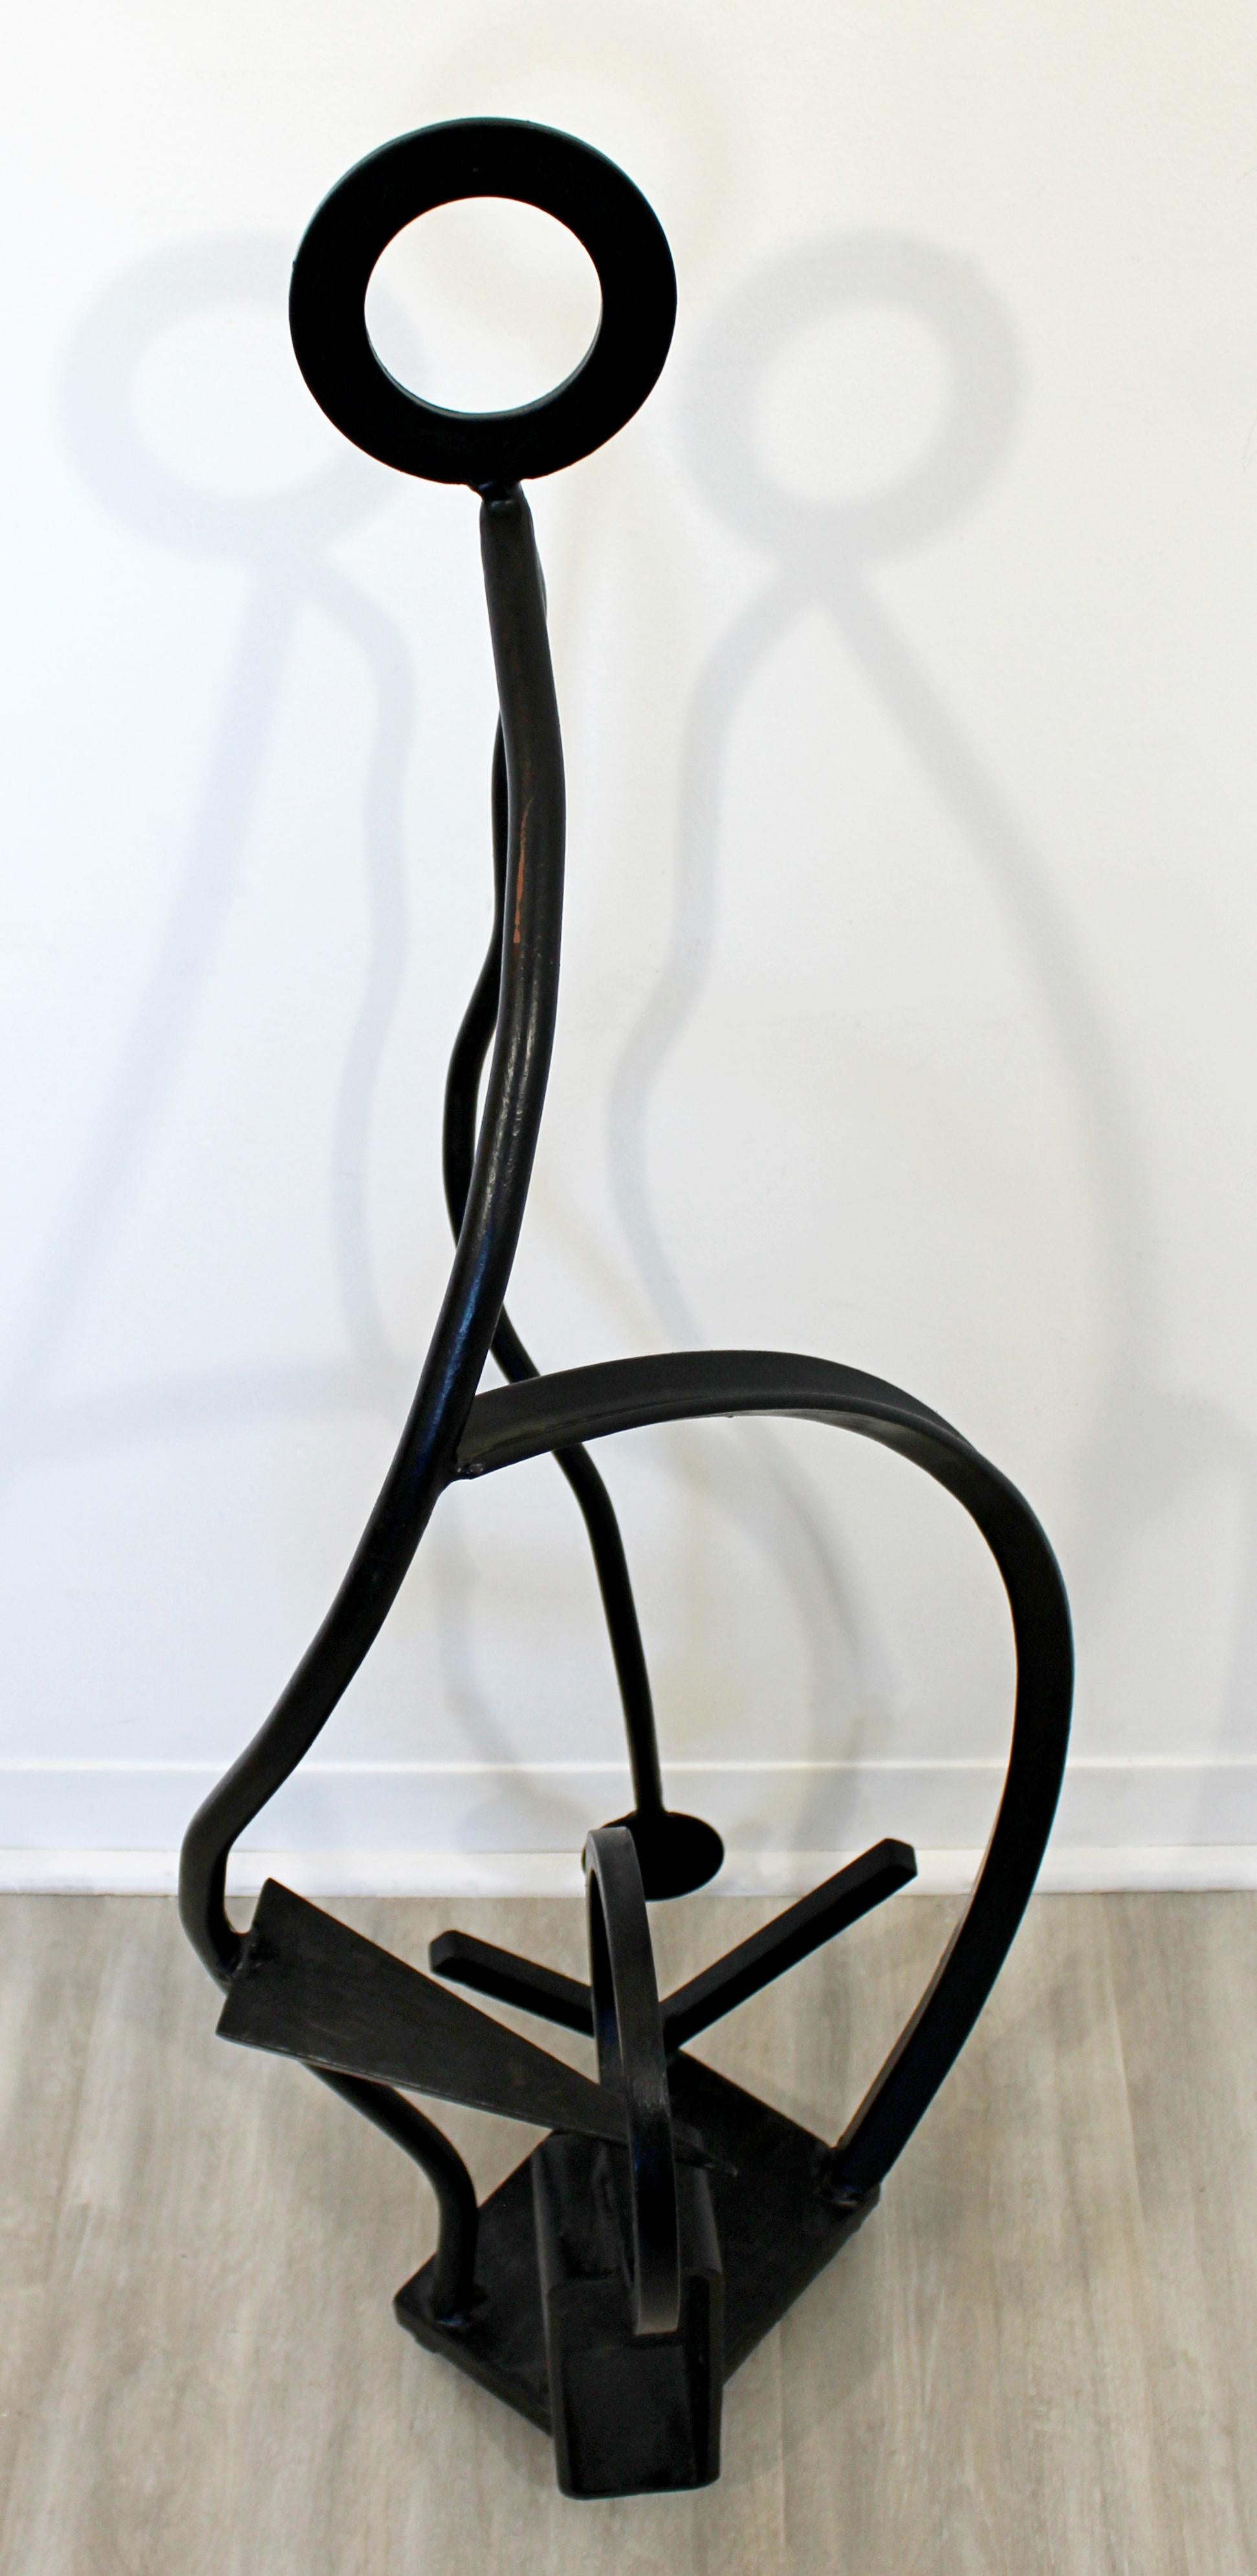 Contemporary Forged Iron Abstract Art Floor Sculpture Black by Robert Hansen In Good Condition For Sale In Keego Harbor, MI